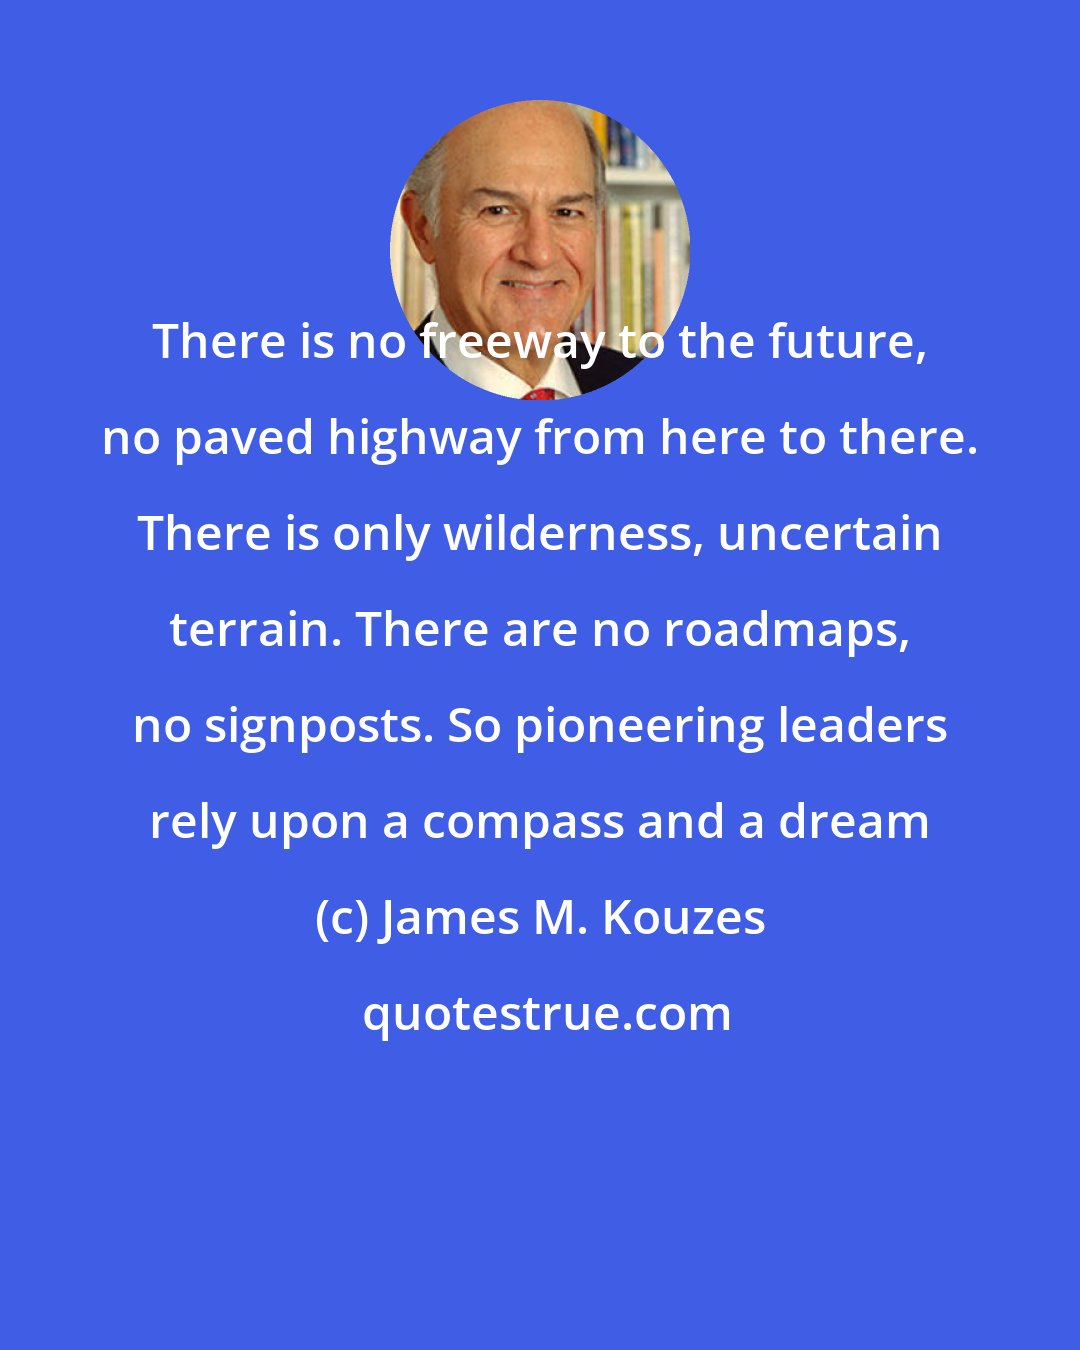 James M. Kouzes: There is no freeway to the future, no paved highway from here to there. There is only wilderness, uncertain terrain. There are no roadmaps, no signposts. So pioneering leaders rely upon a compass and a dream